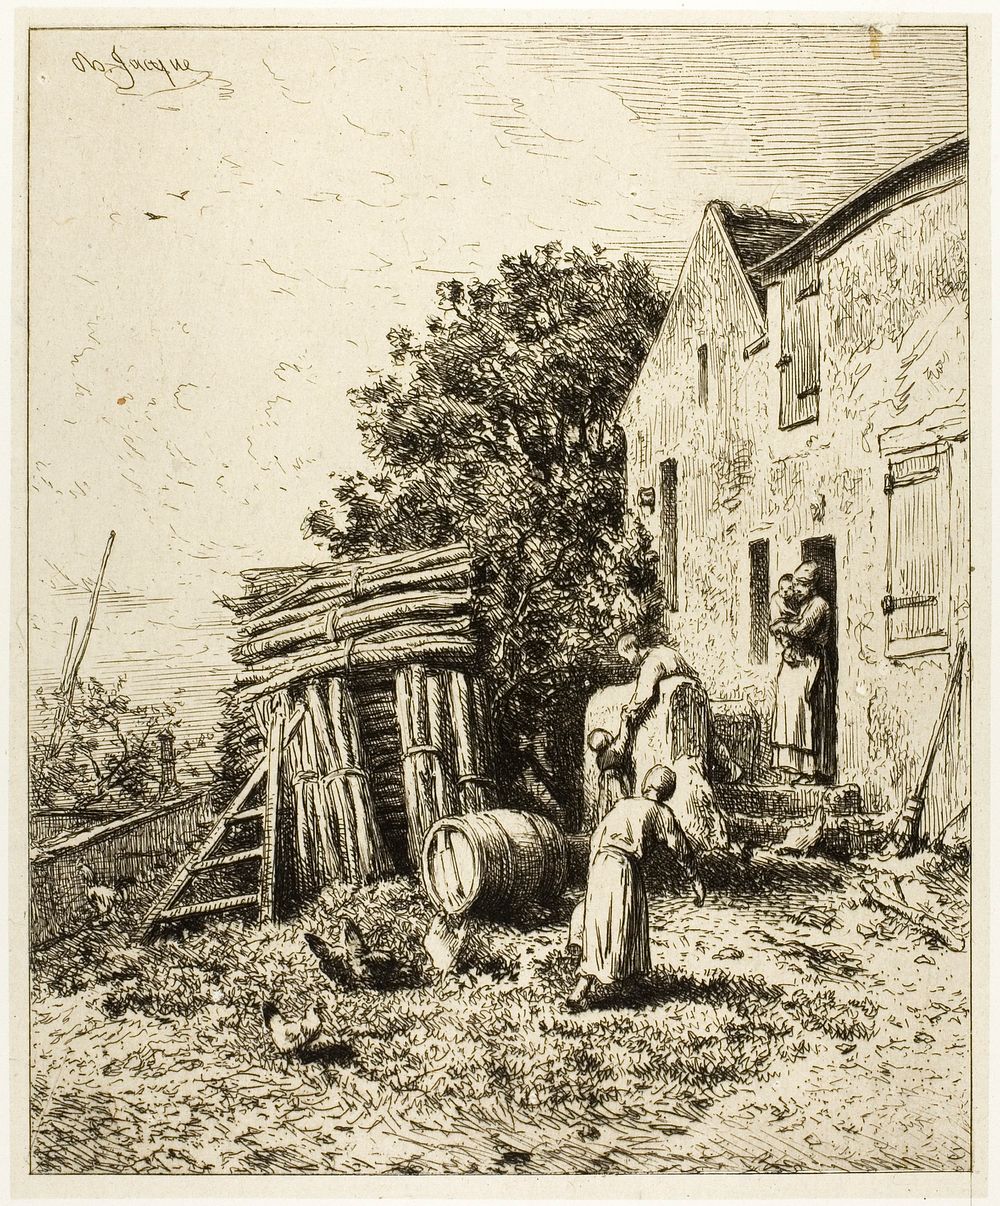 A Rustic Dwelling by Charles Émile Jacque